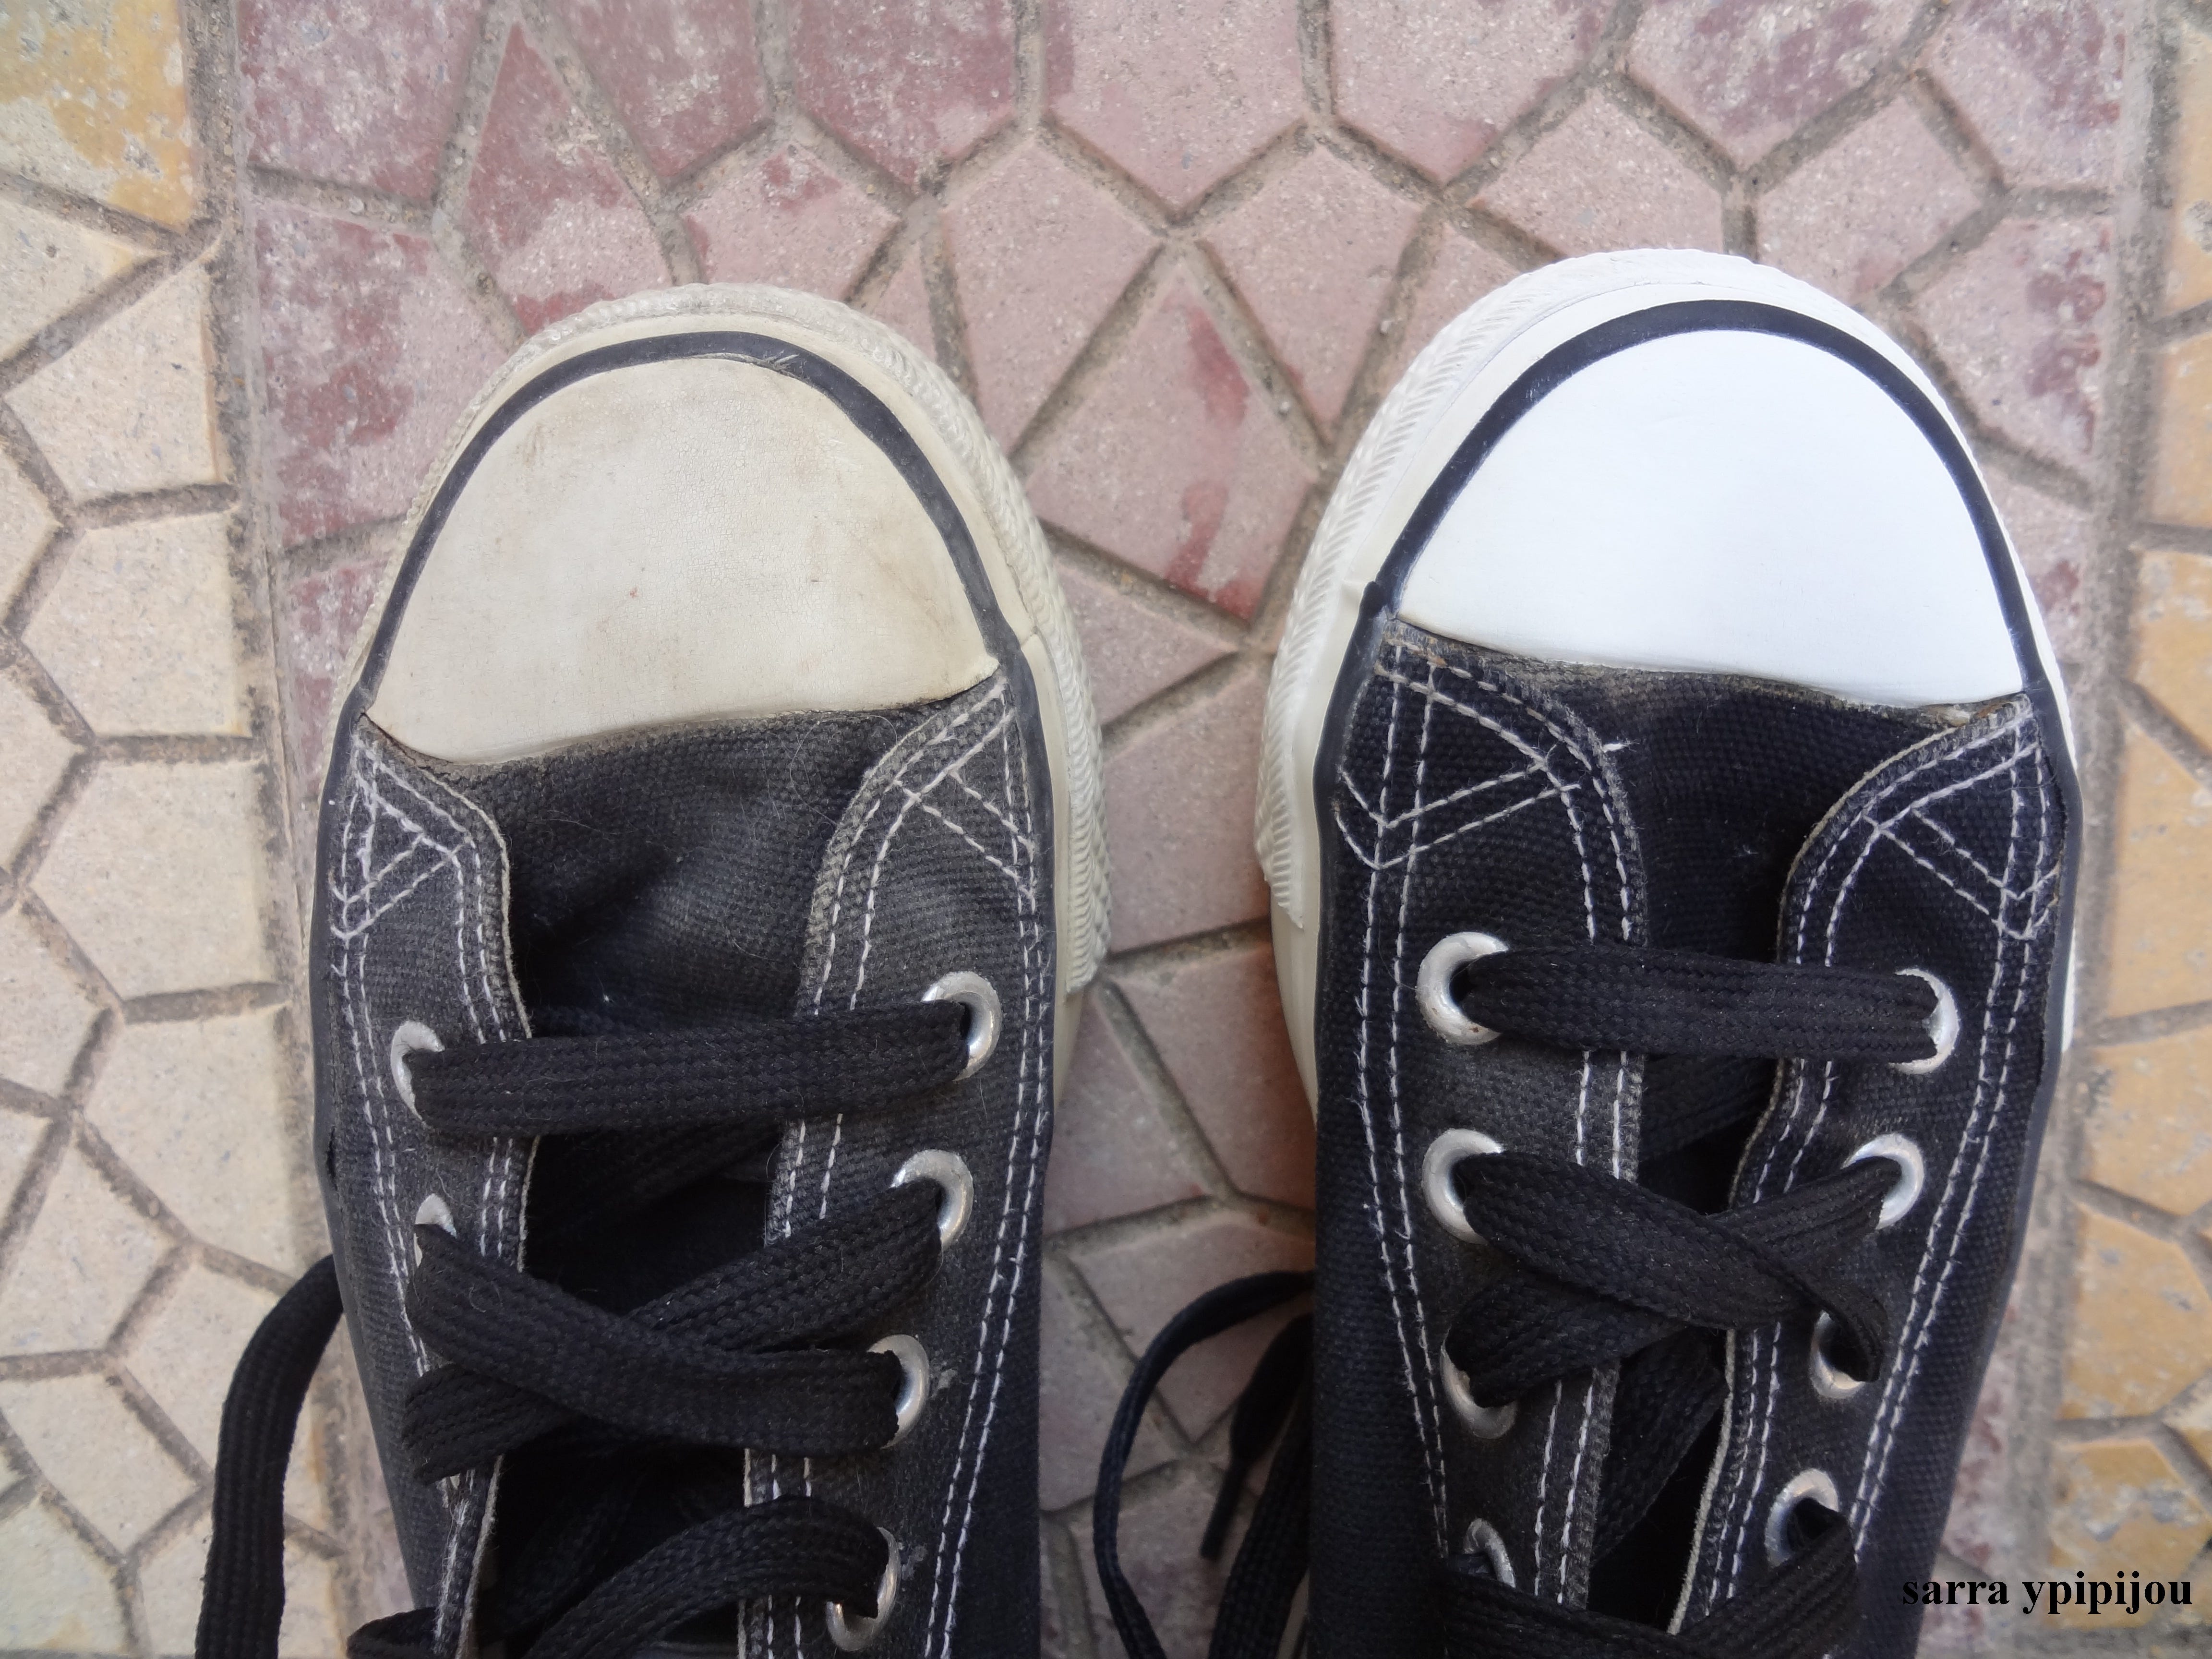 How To Clean Converse Sneakers When They Turn Yellow | by sarra | Medium